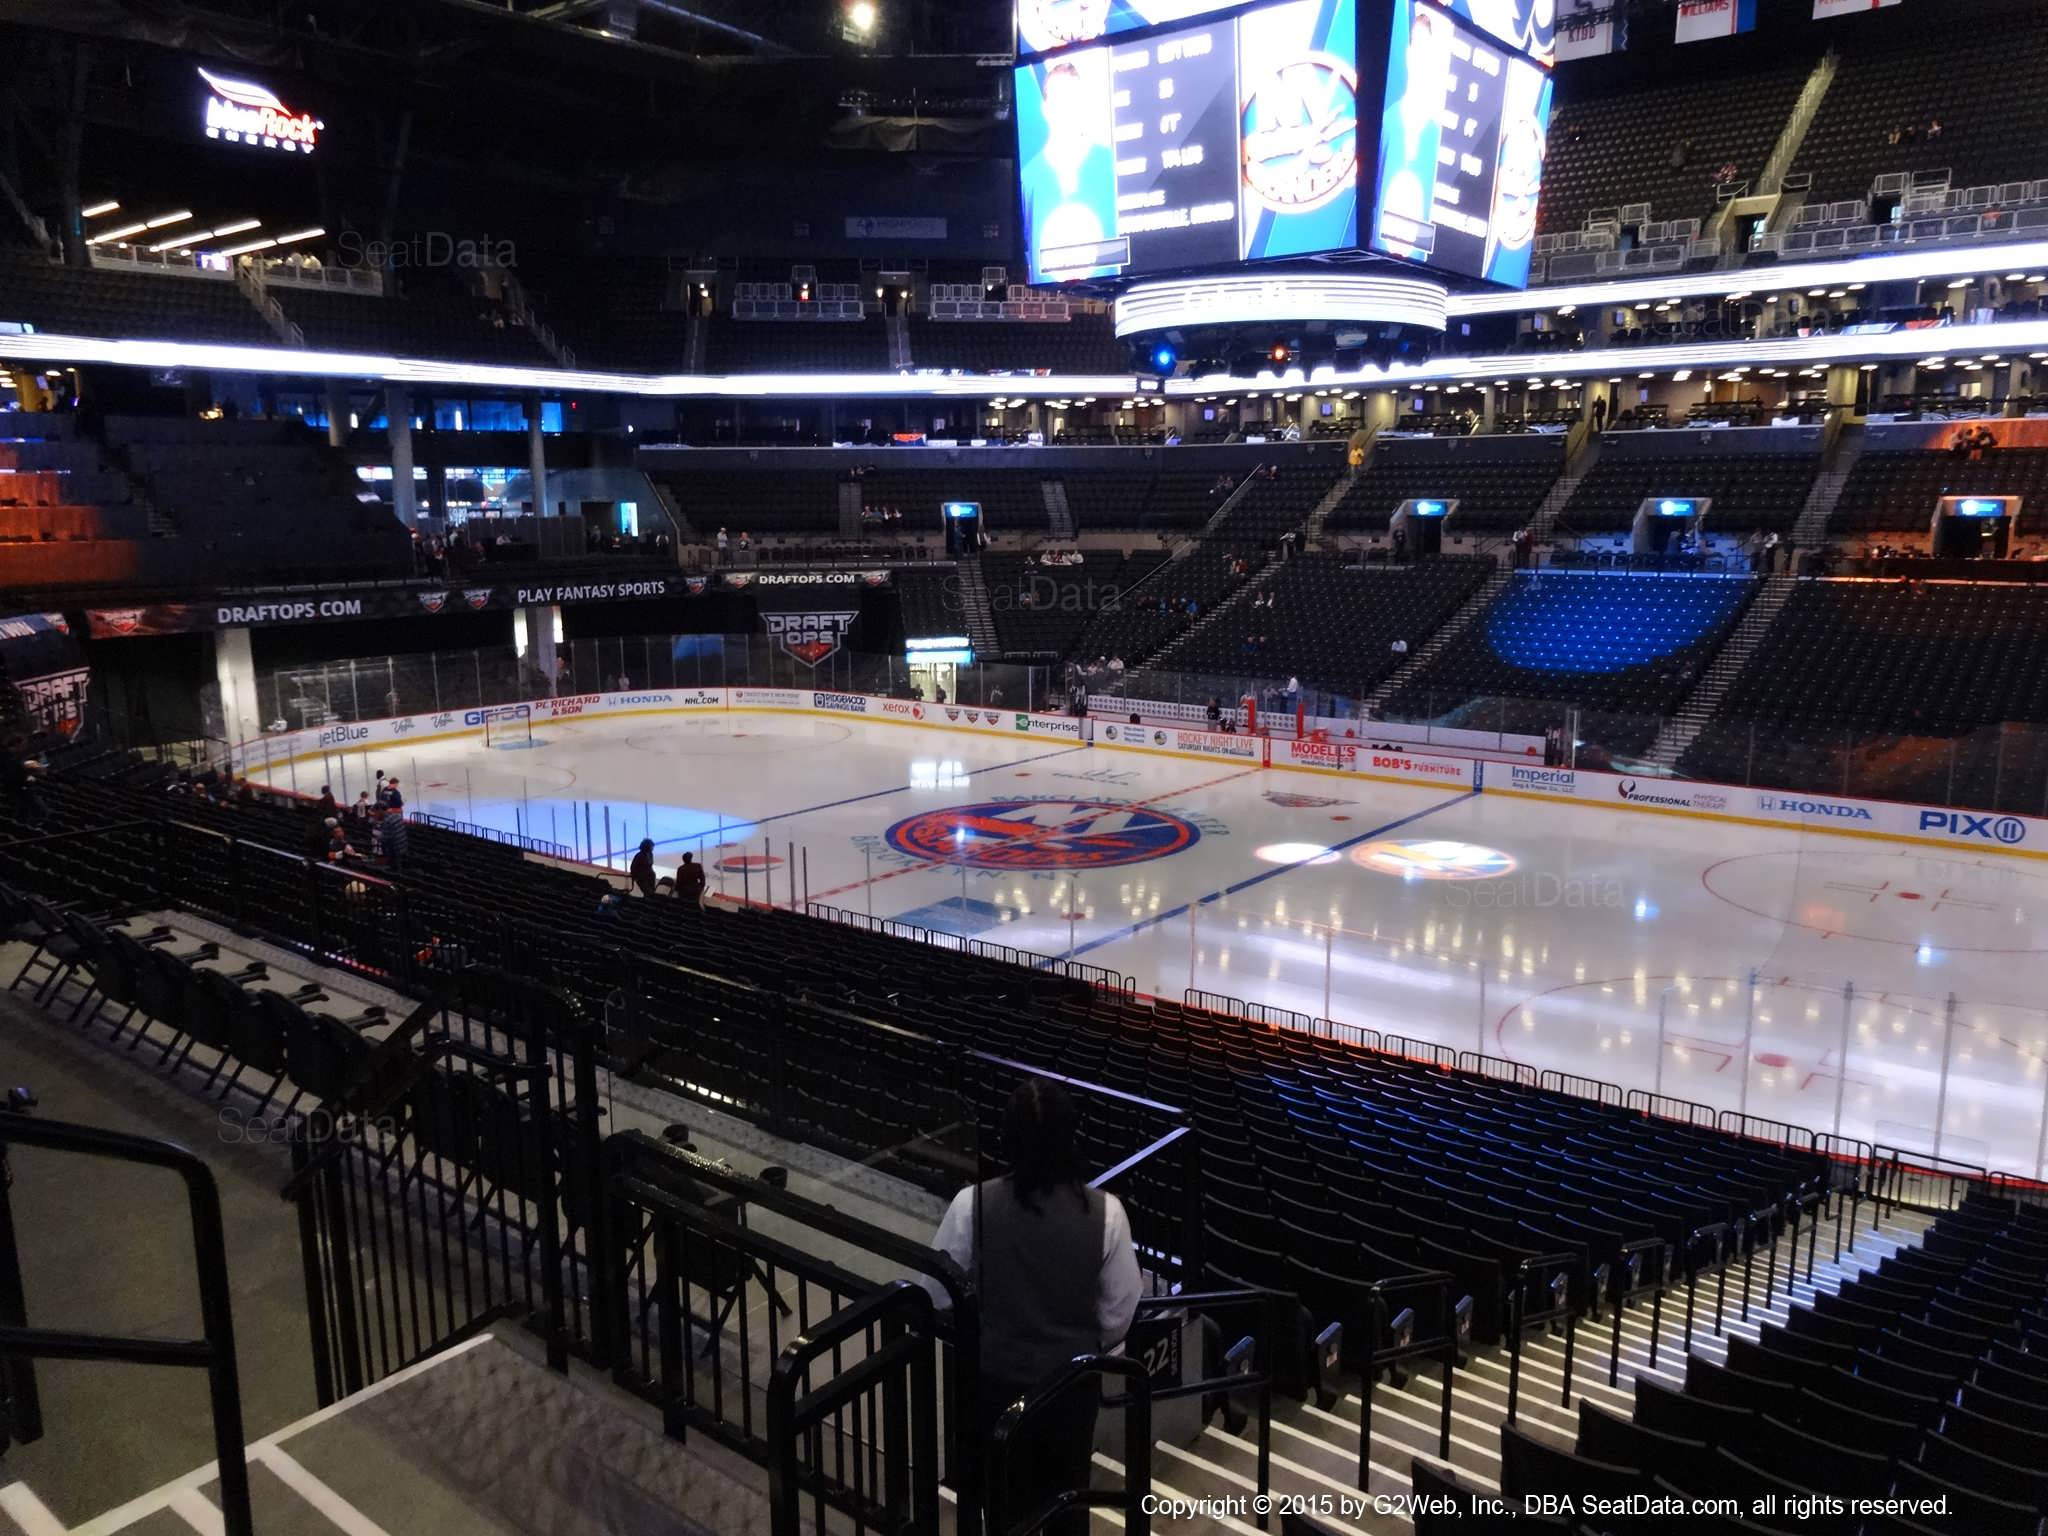 Seat View from Section 122 at the Barclays Center, home of the New York Islanders